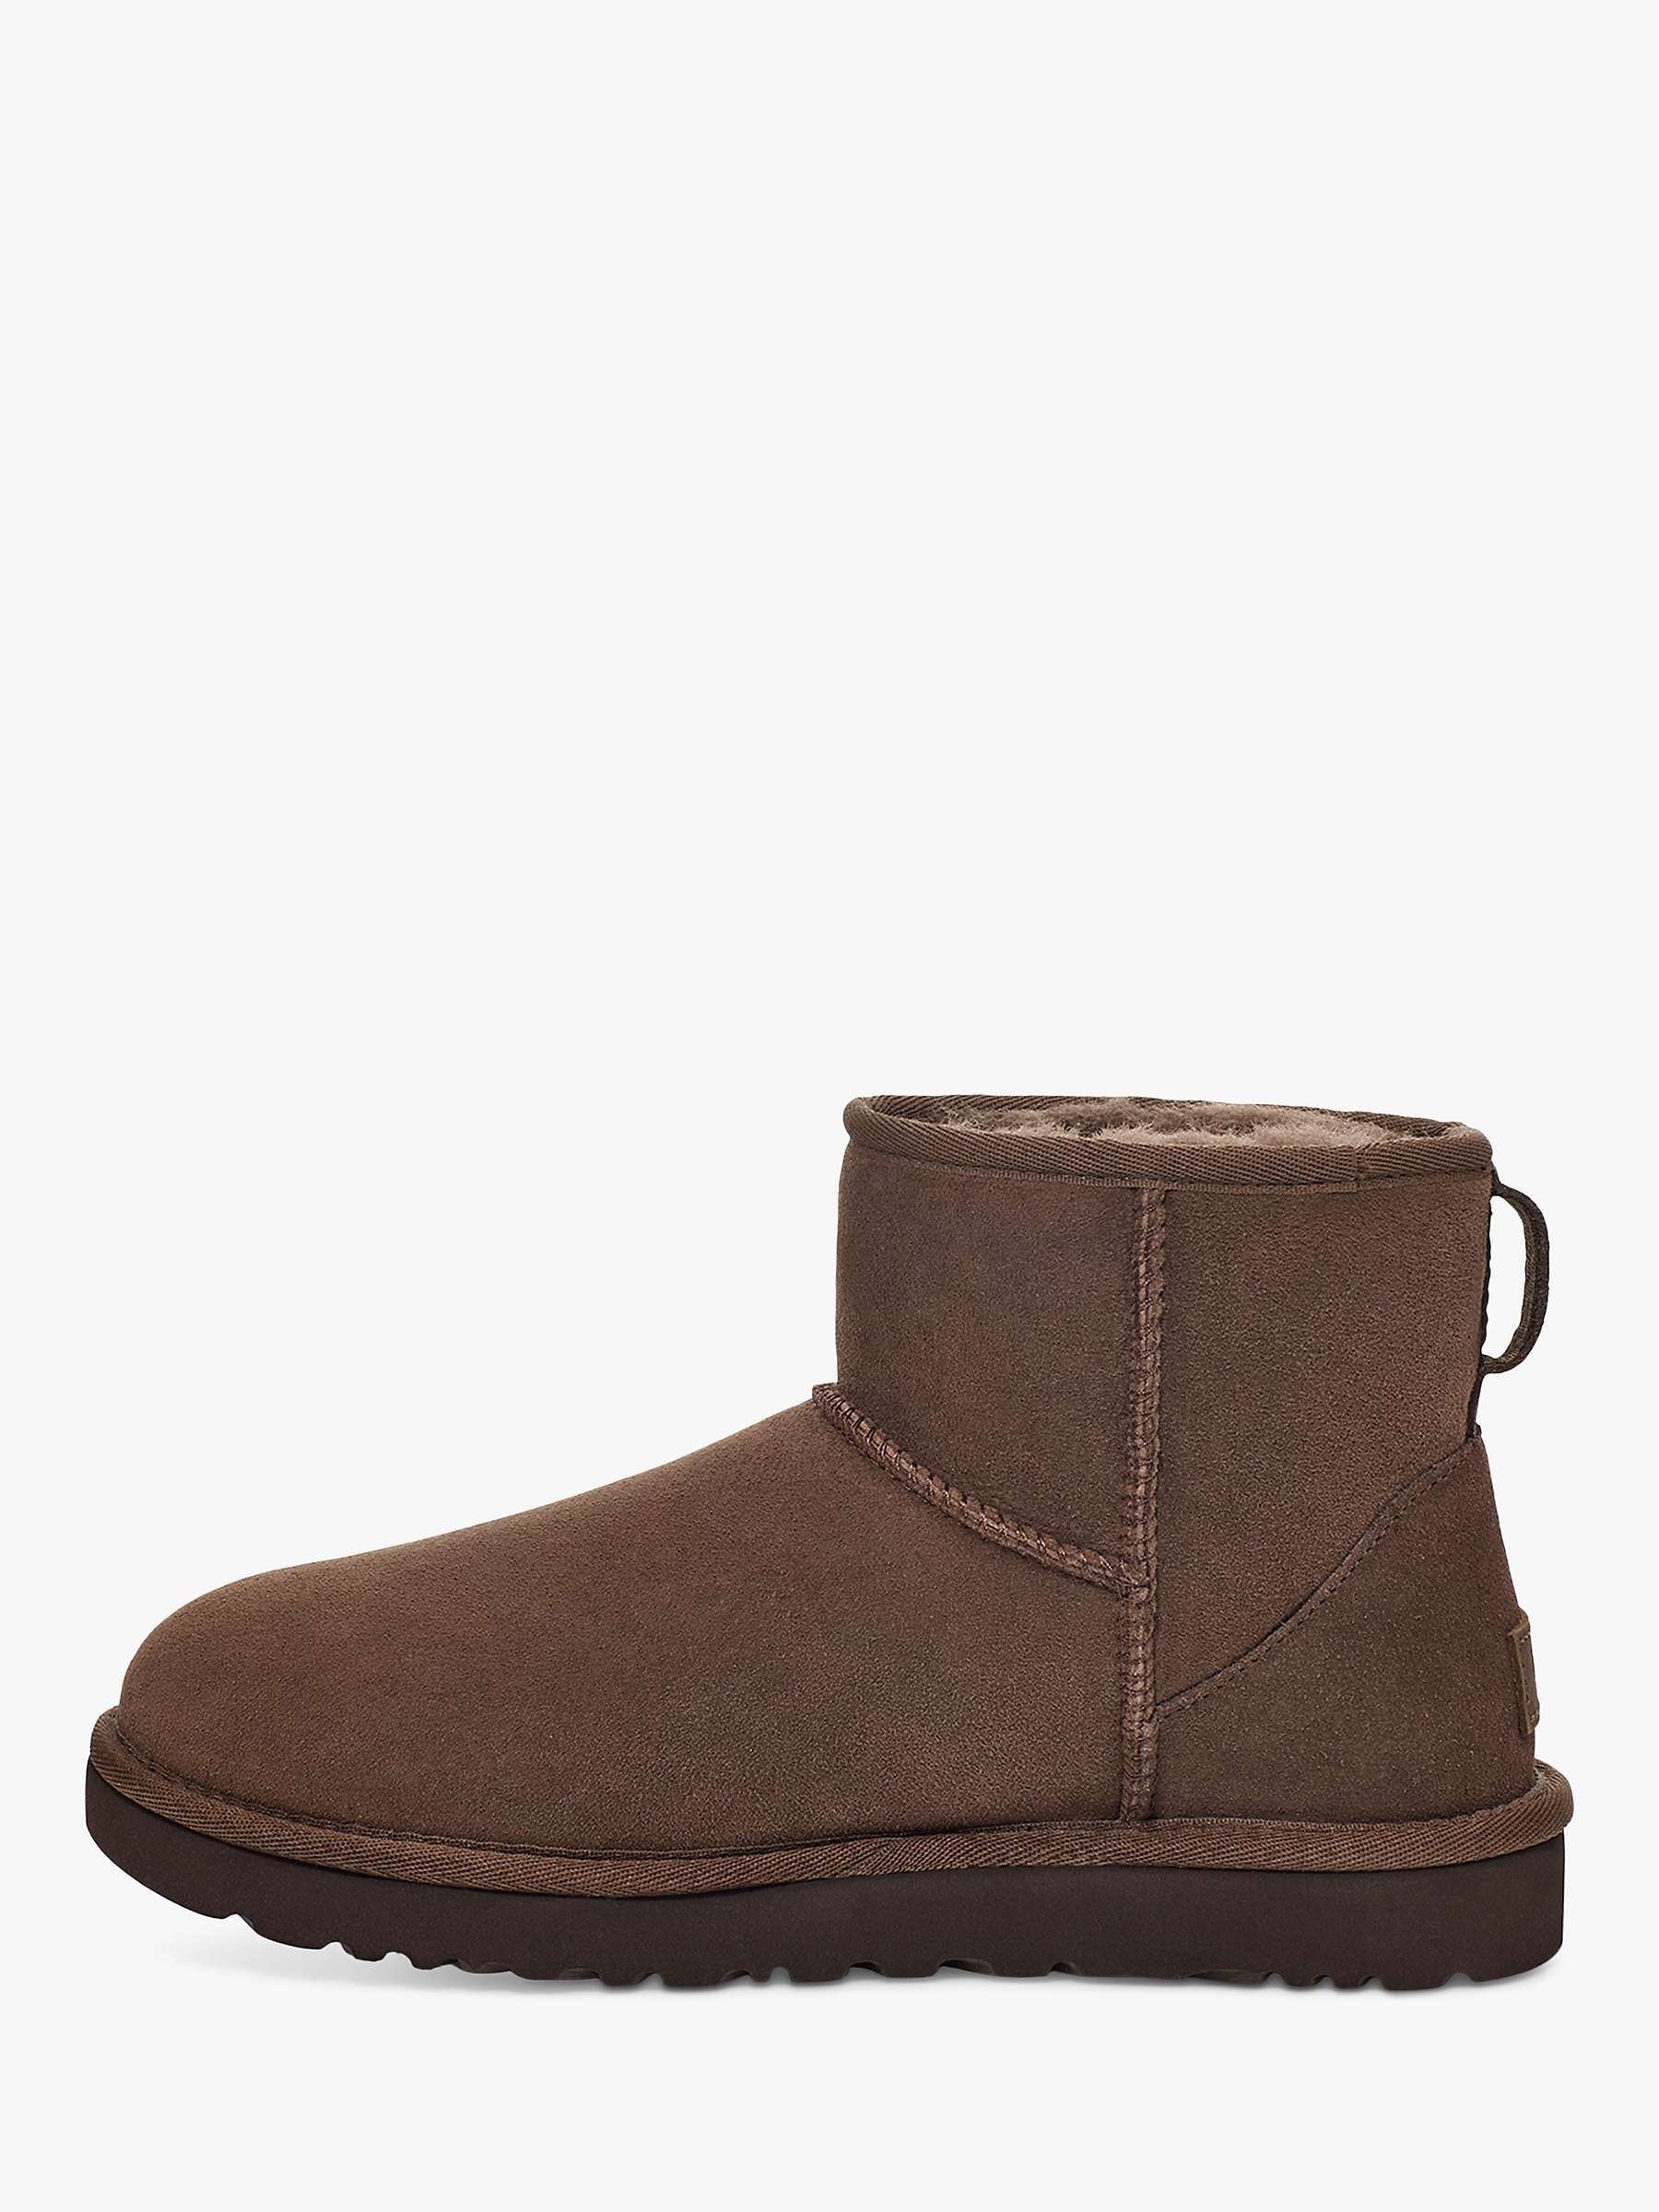 Buy UGG Classic Mini Short Leather Boots Online at johnlewis.com